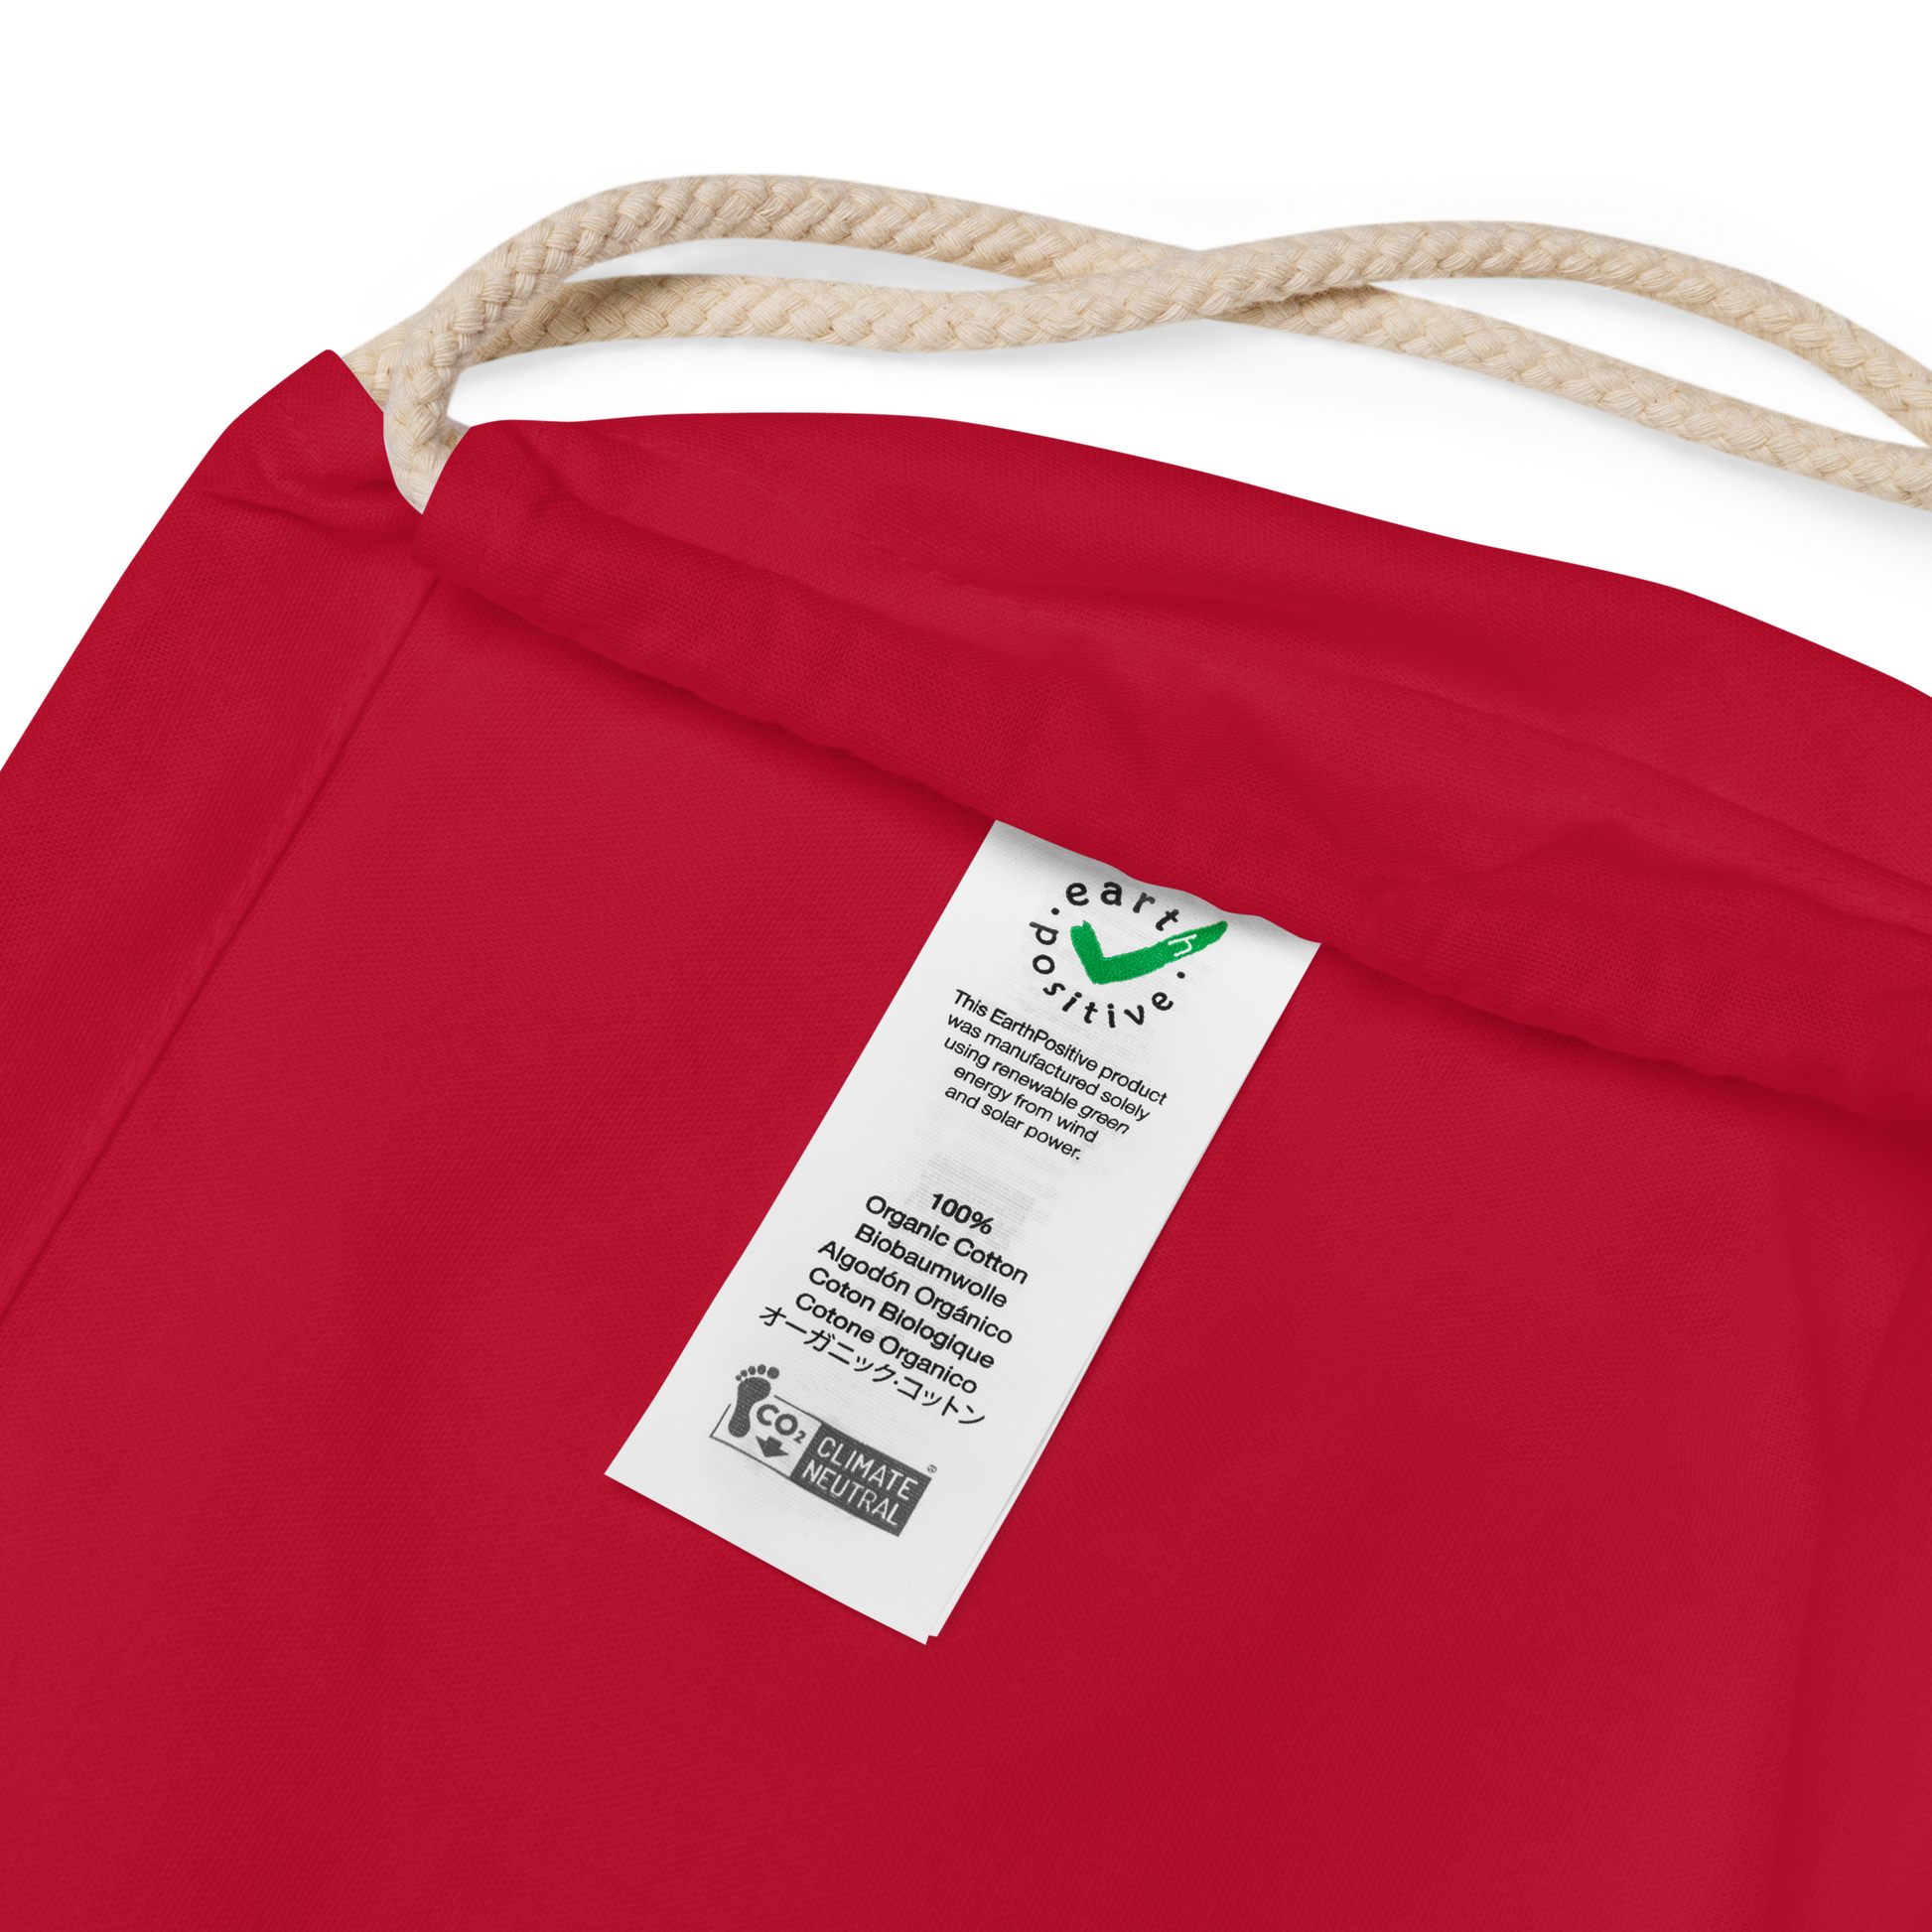 Inside label of Neurodiversity Rainbow Infinity EarthPositive Cotton Drawstring Bag in Red